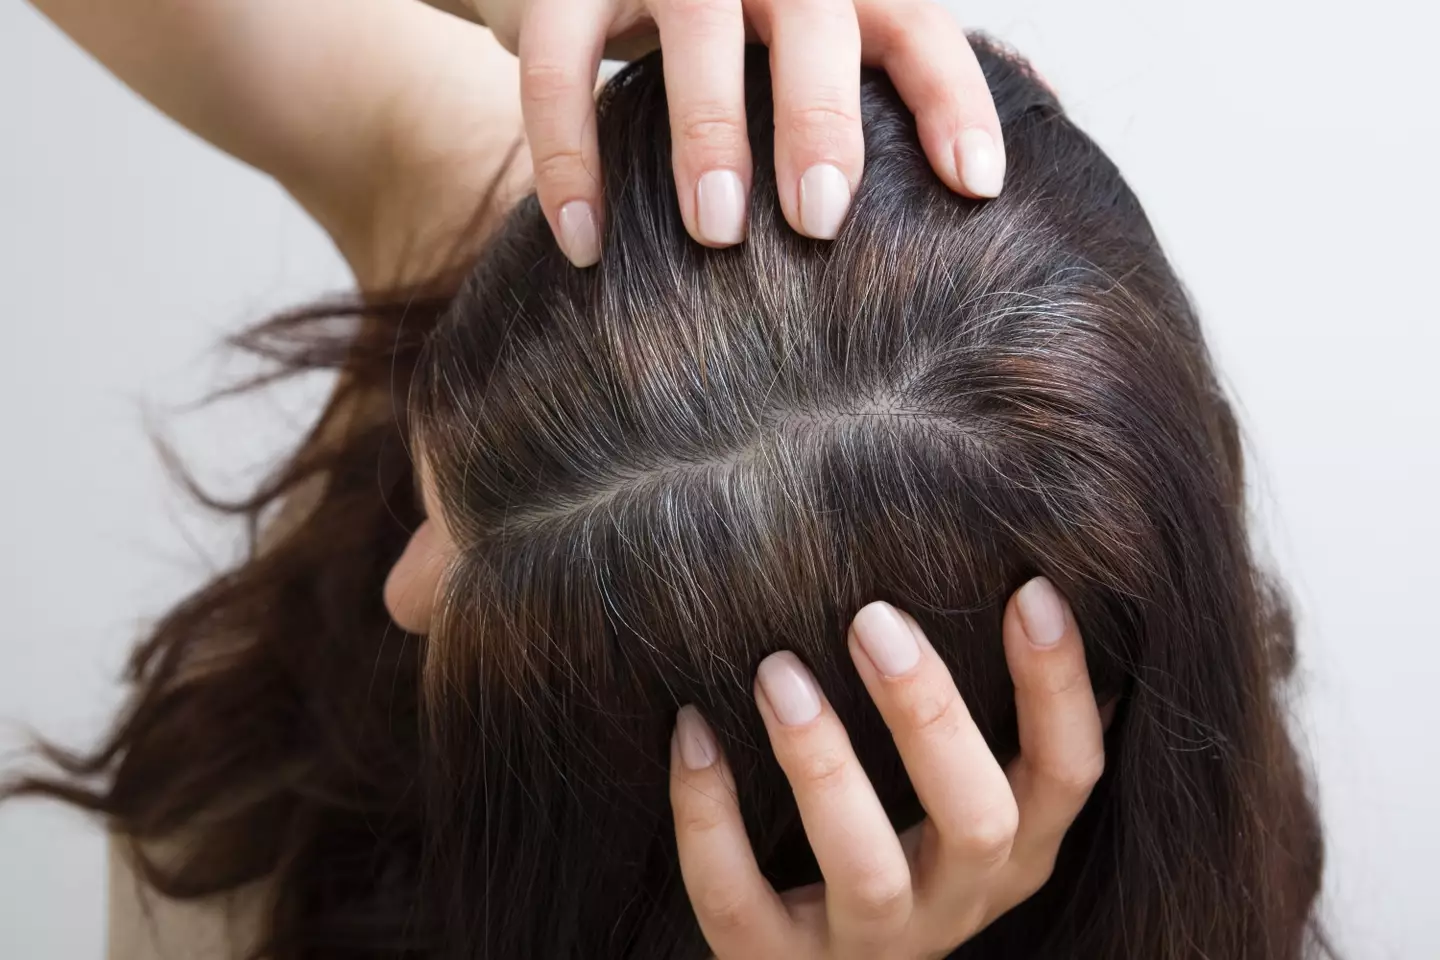 "Pulling out a grey hair is not going to make all the nearby follicles turn grey.”